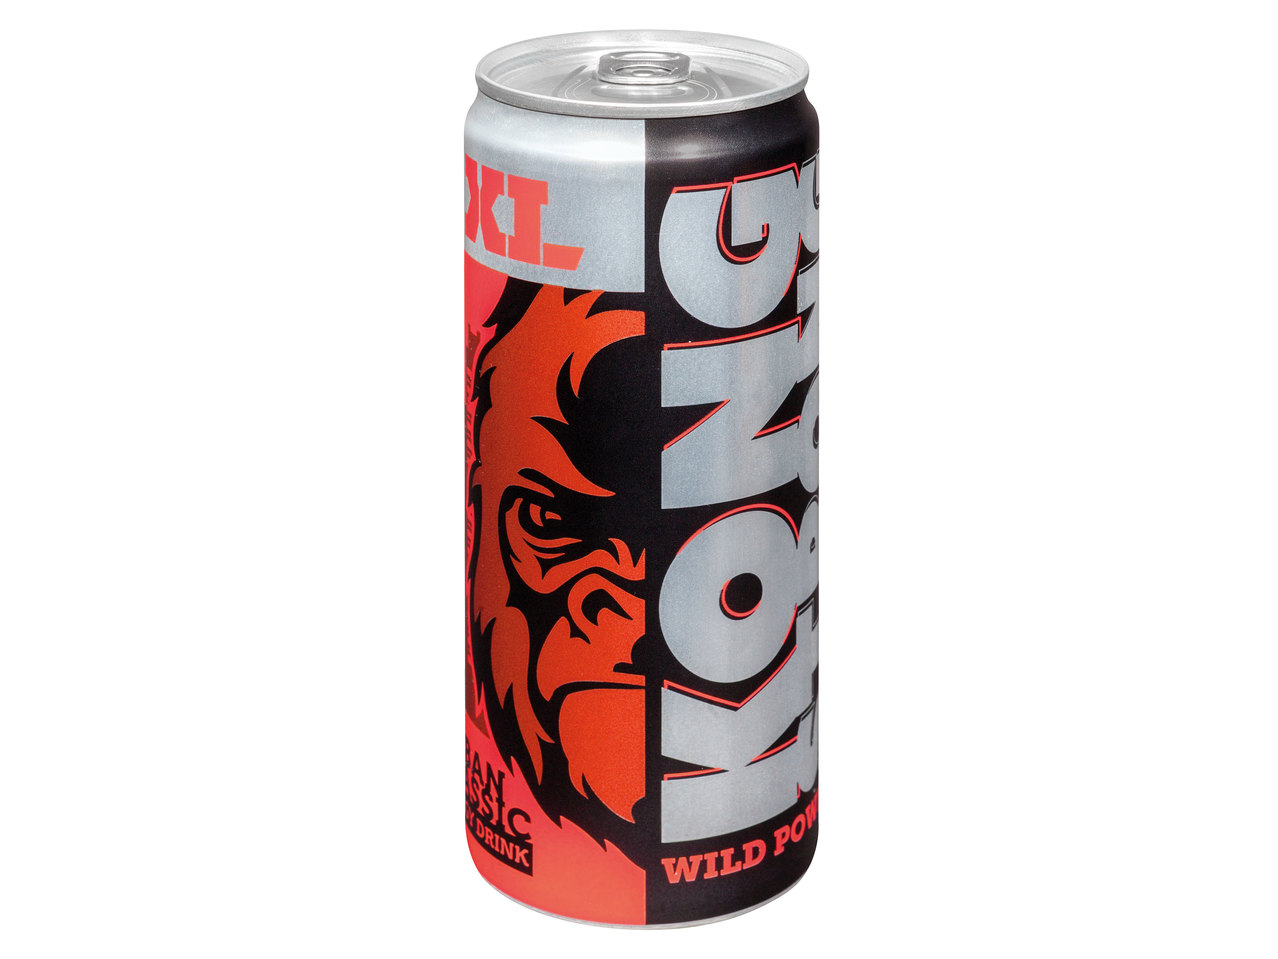 KONG STRONG Energy Drink XL